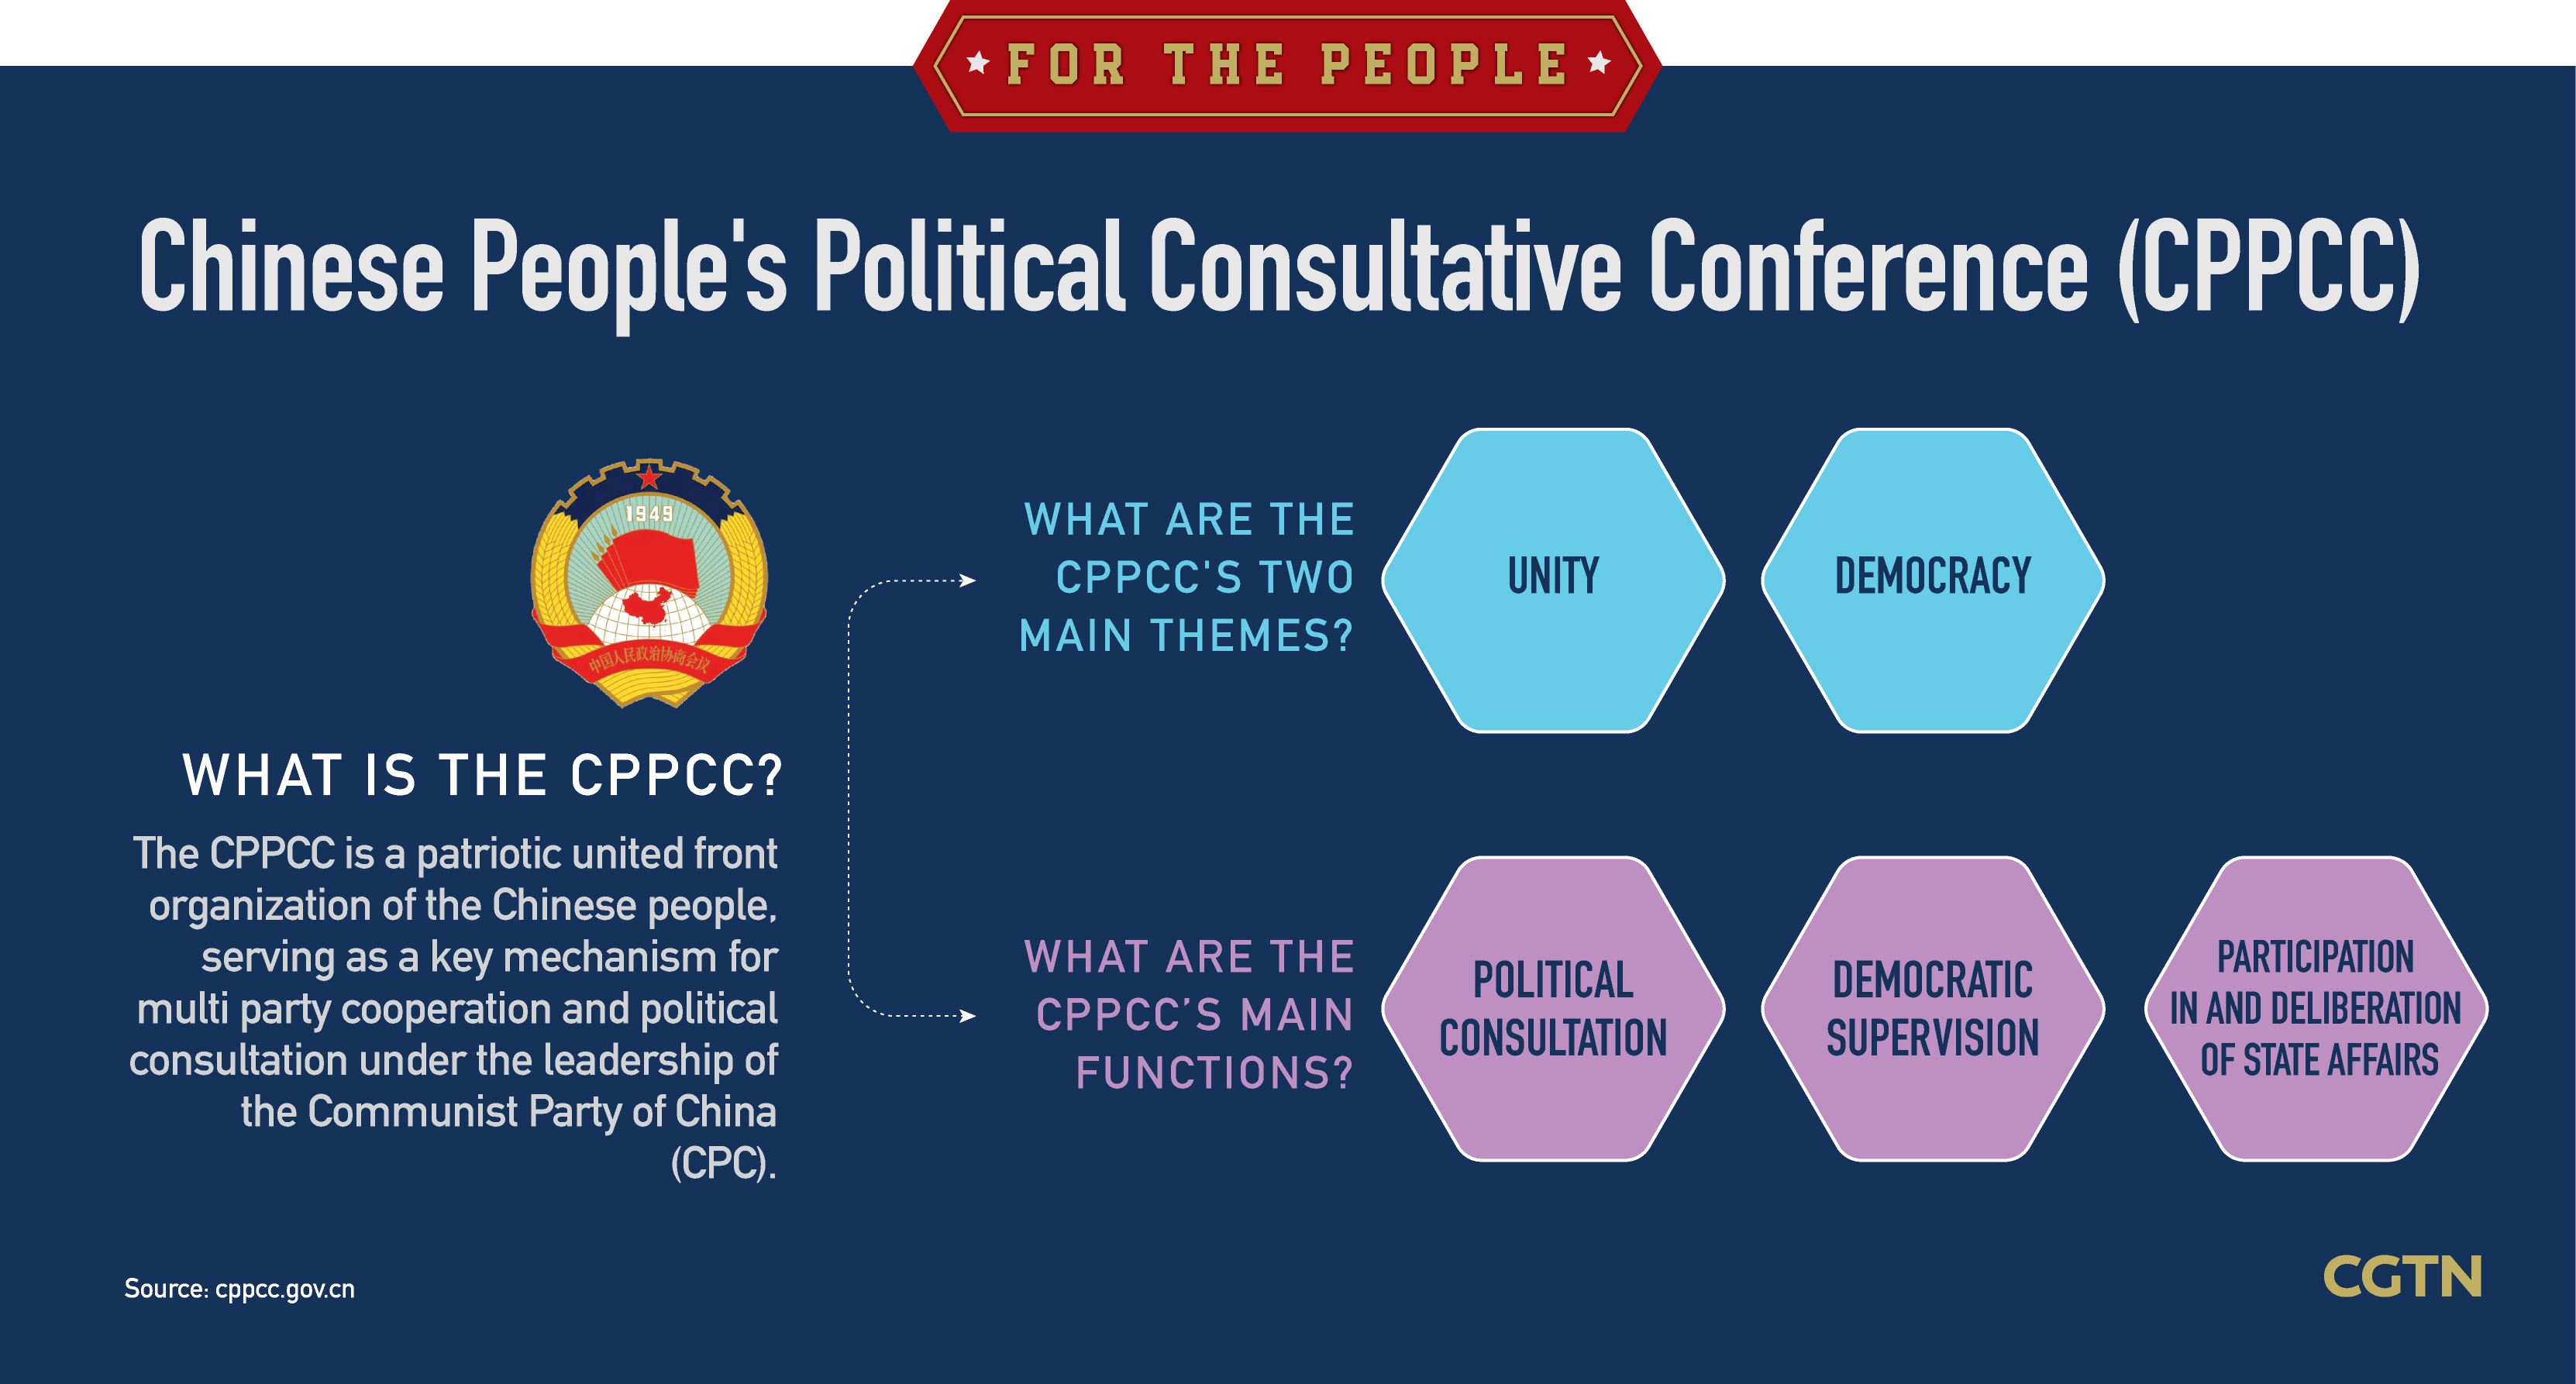 Graphics: CPPCC's role as a platform for democracy